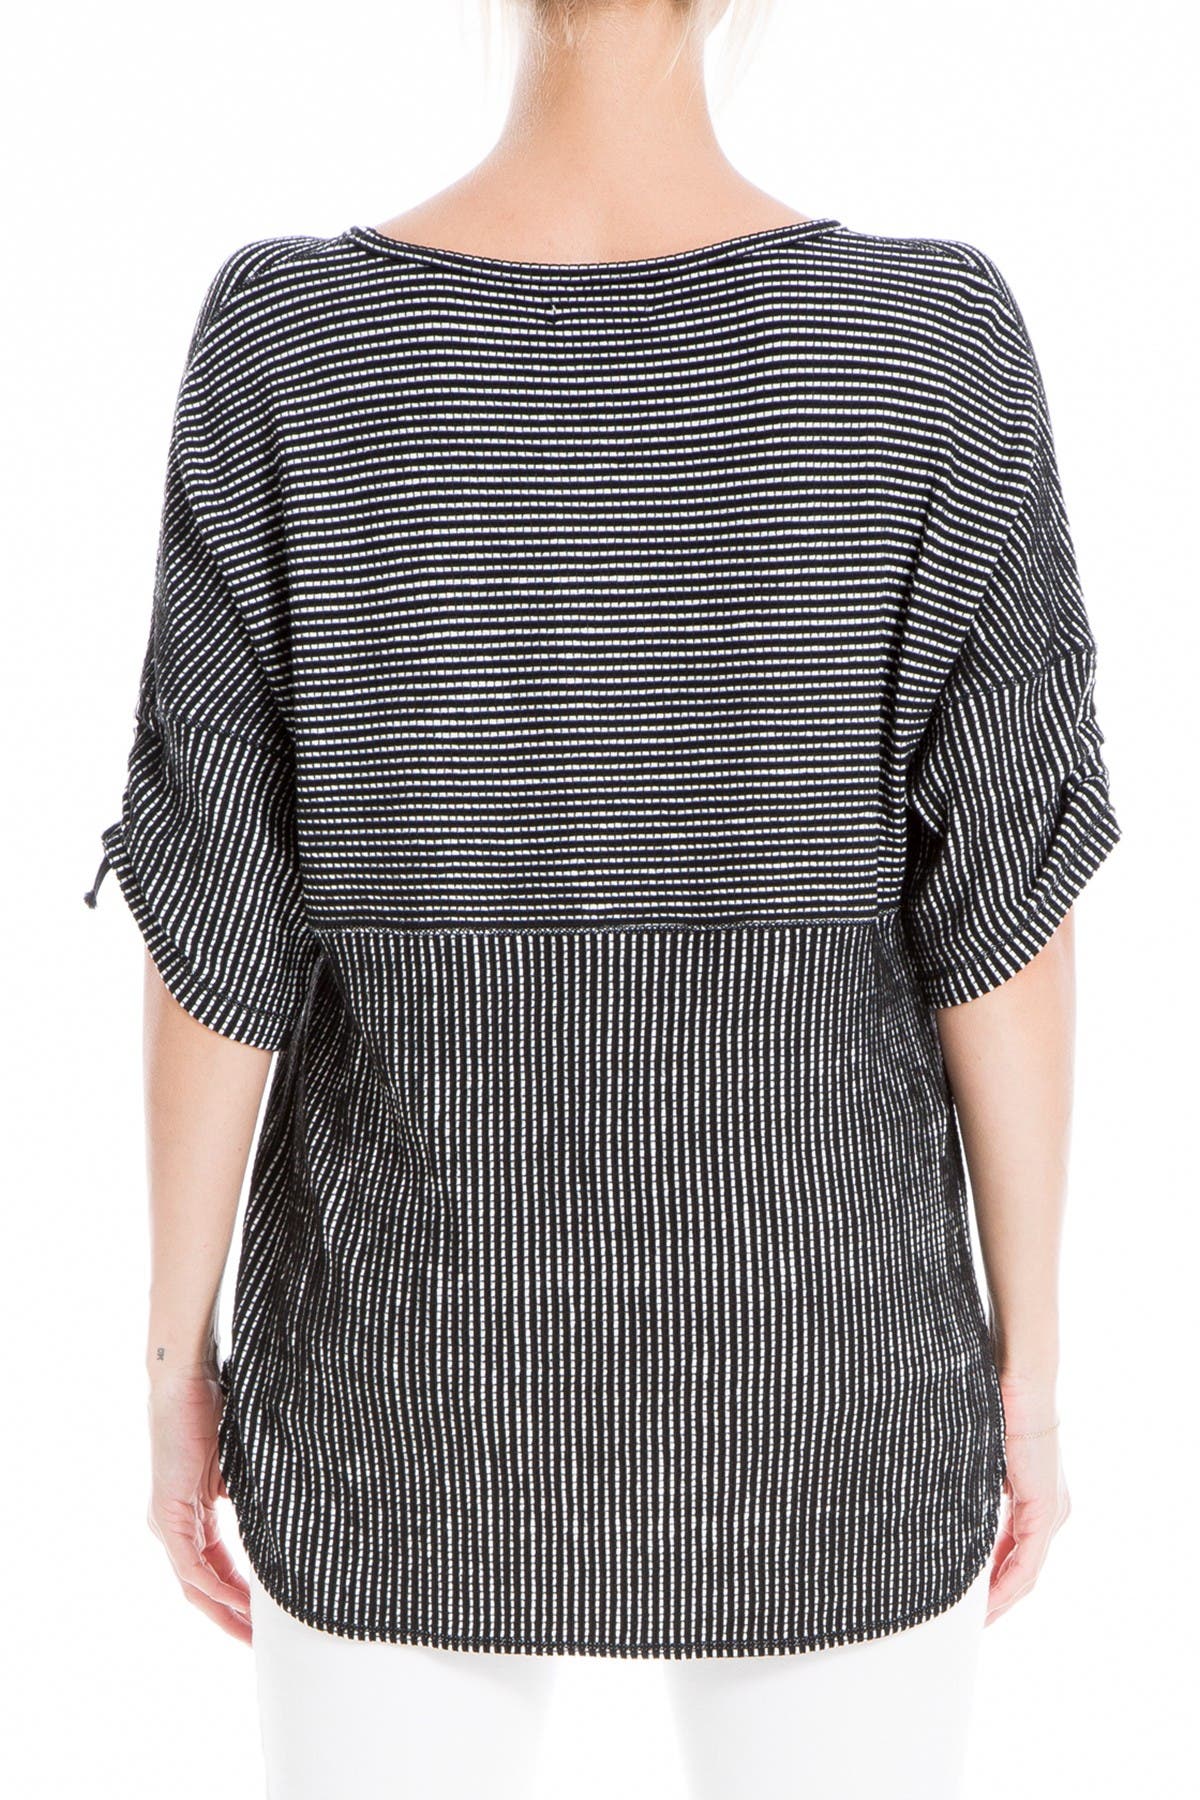 Max Studio | Striped Ruched Elbow Sleeve Textured Top | Nordstrom Rack